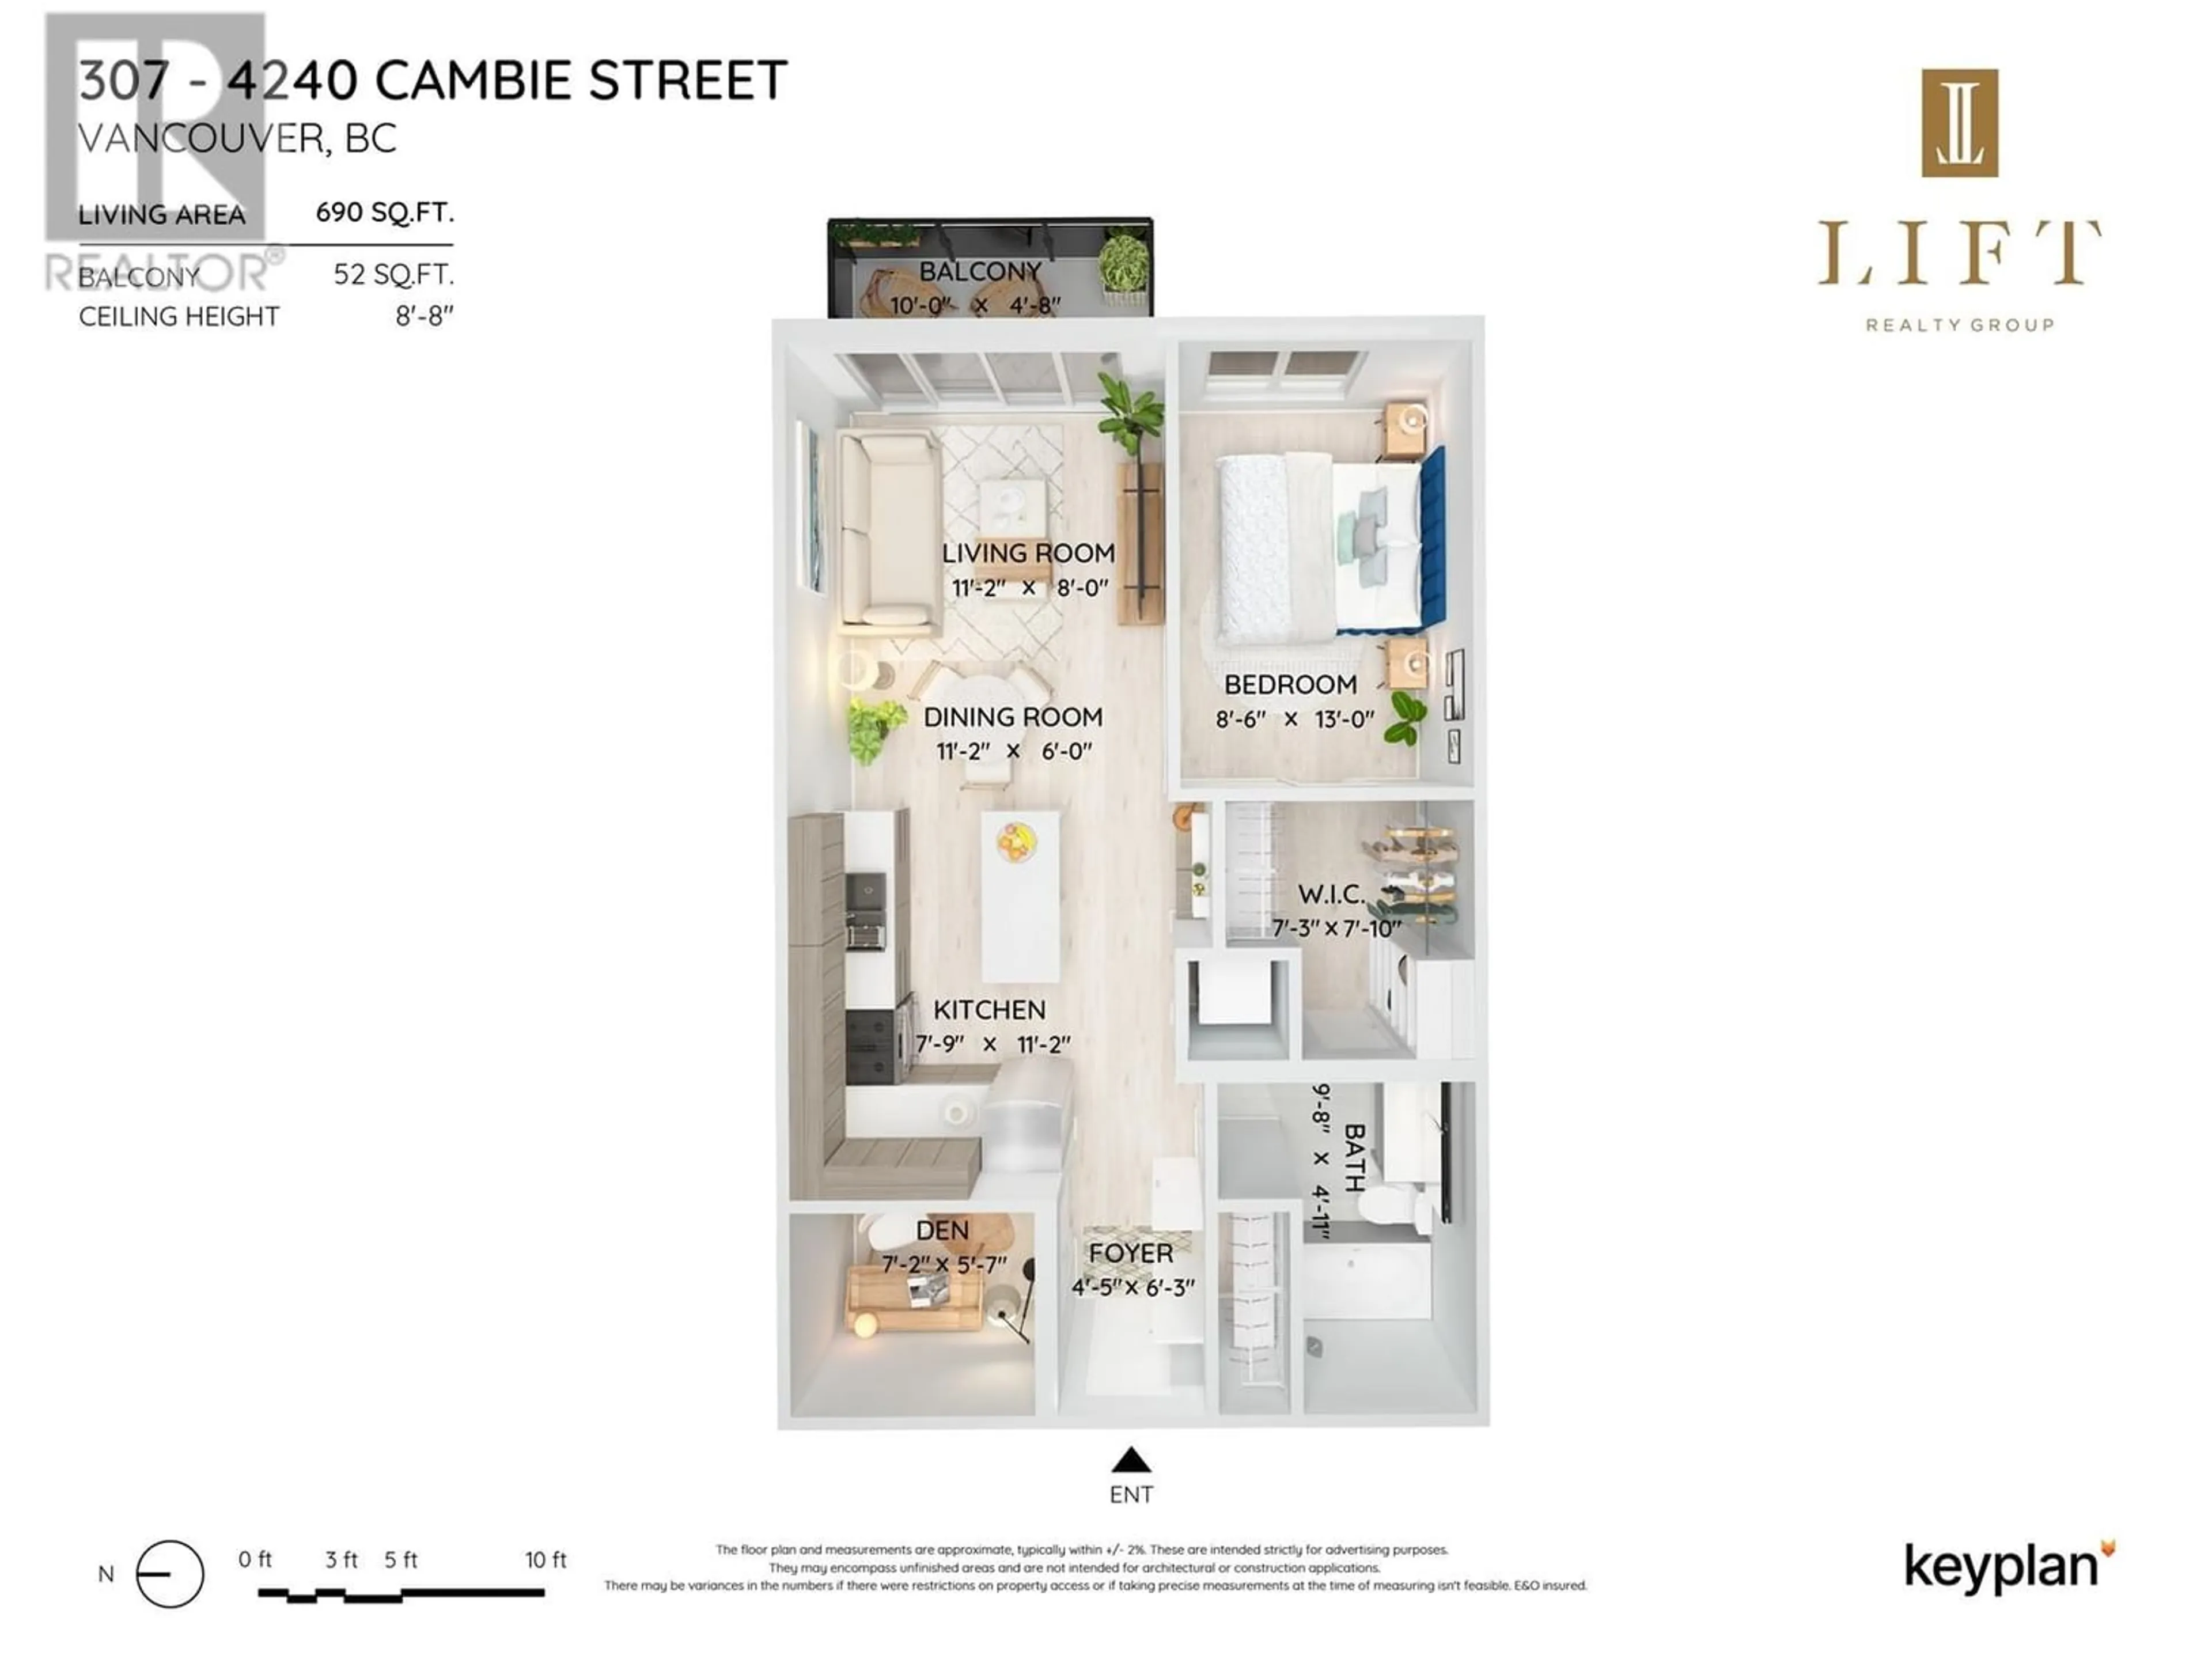 Floor plan for 307 4240 CAMBIE STREET, Vancouver British Columbia V6B2N4